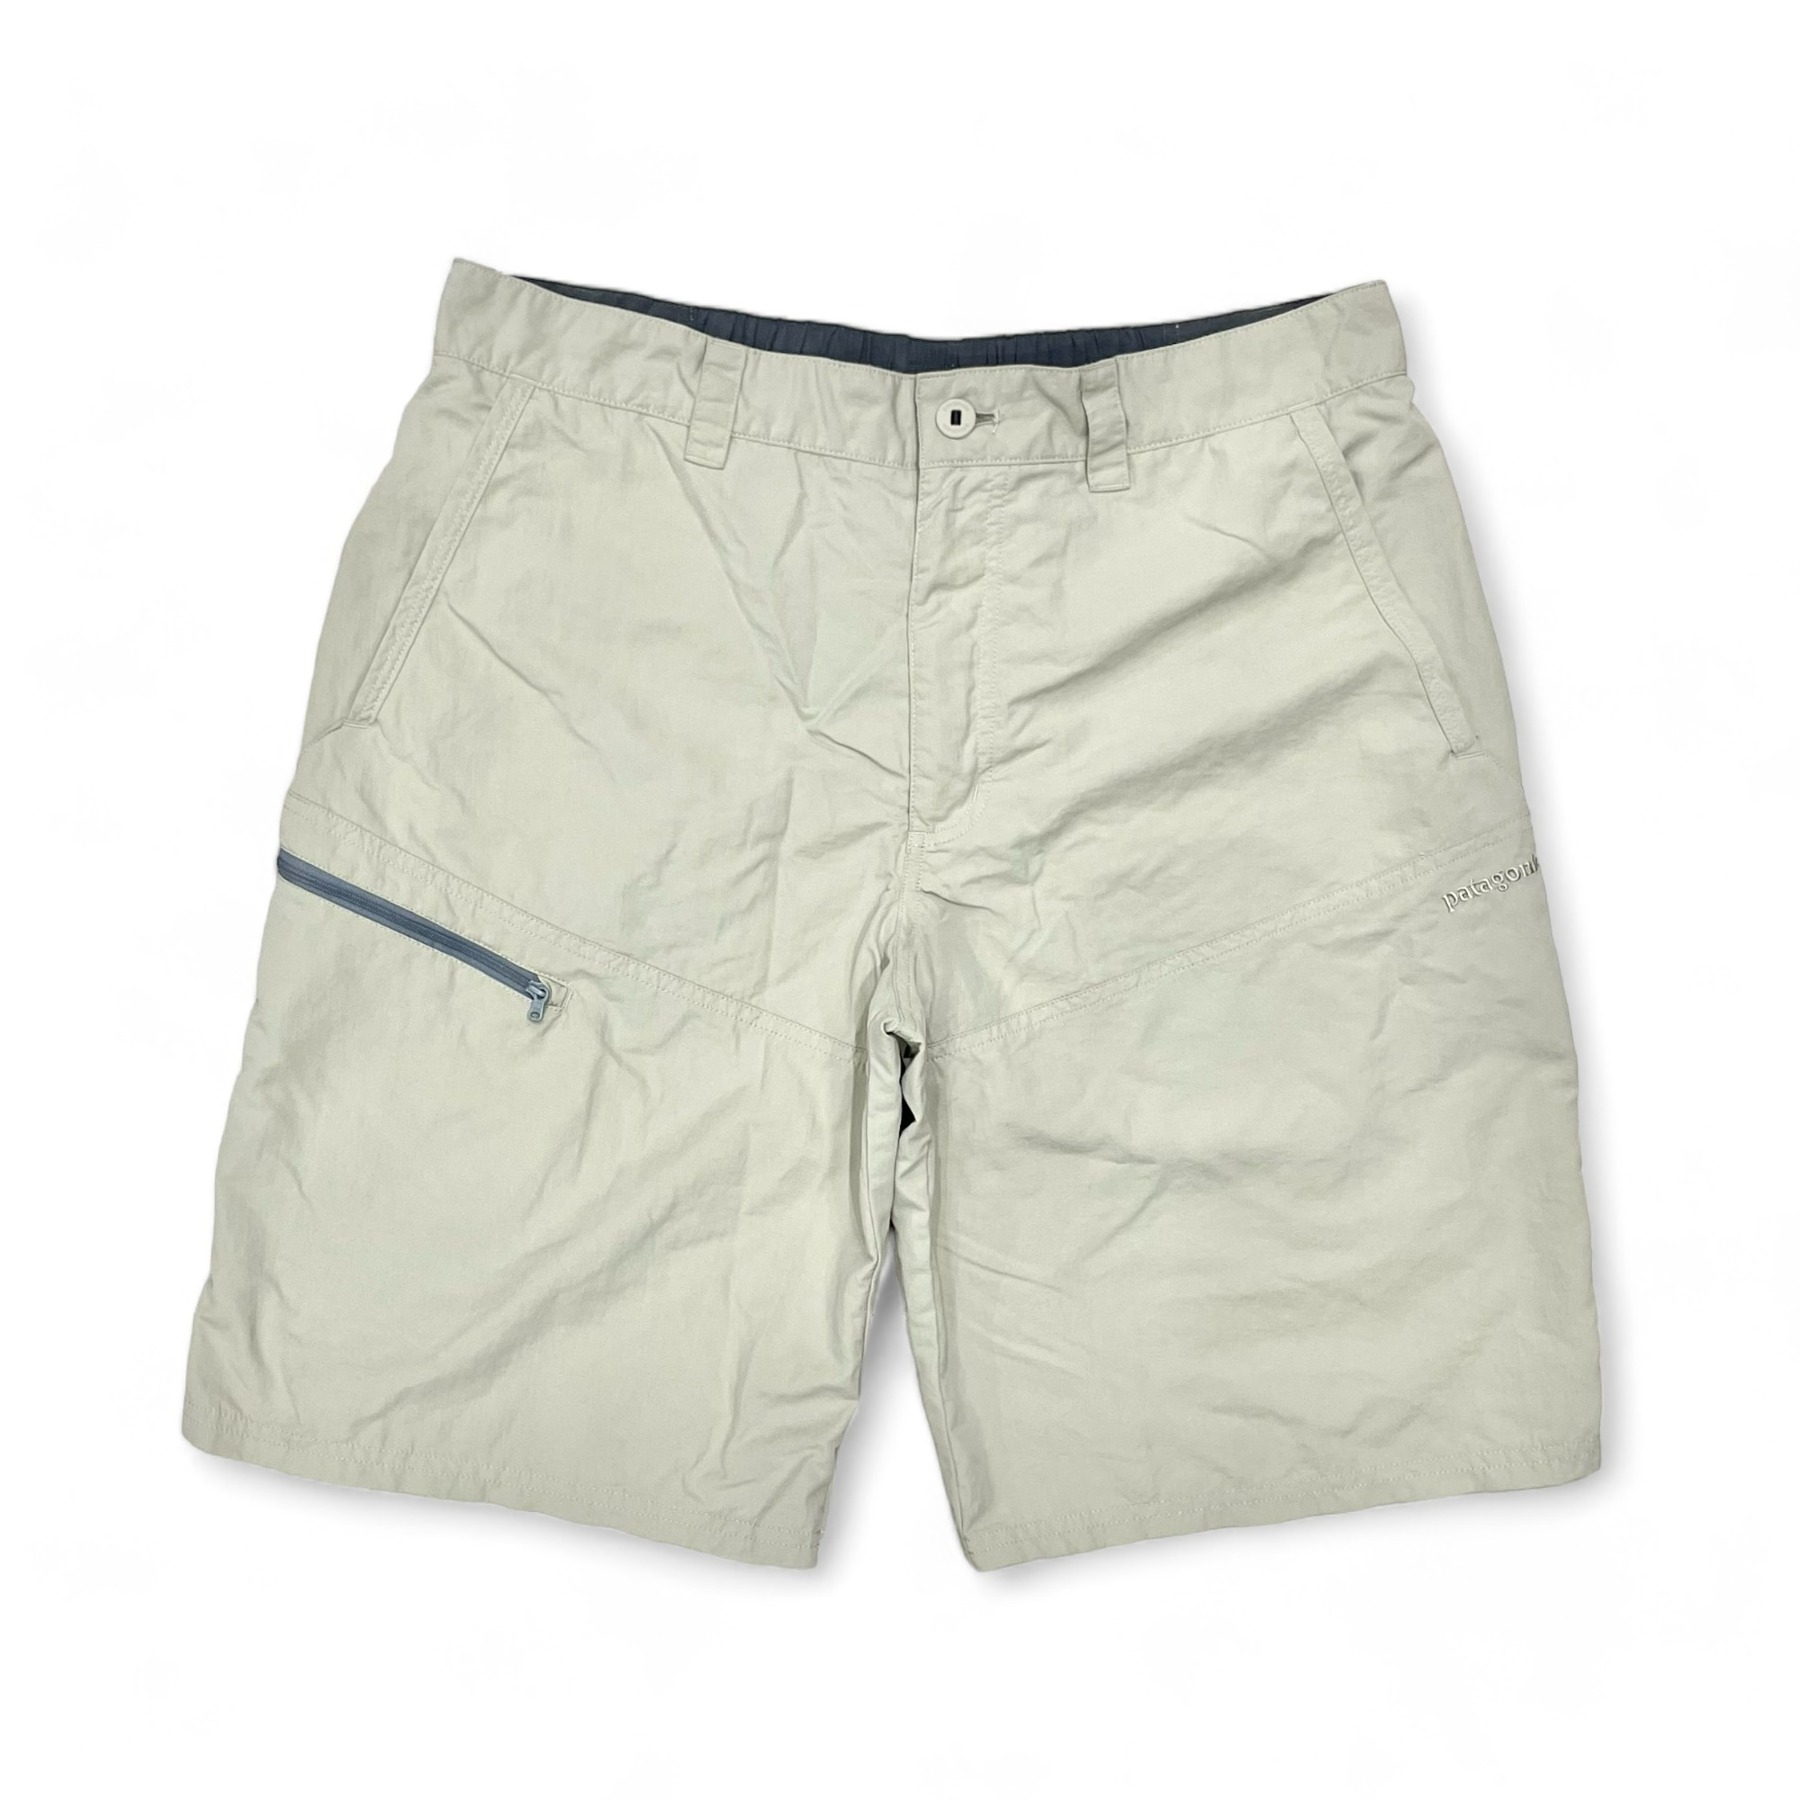 Patagonia Sandy Cay Shorts - 34 to 35inch